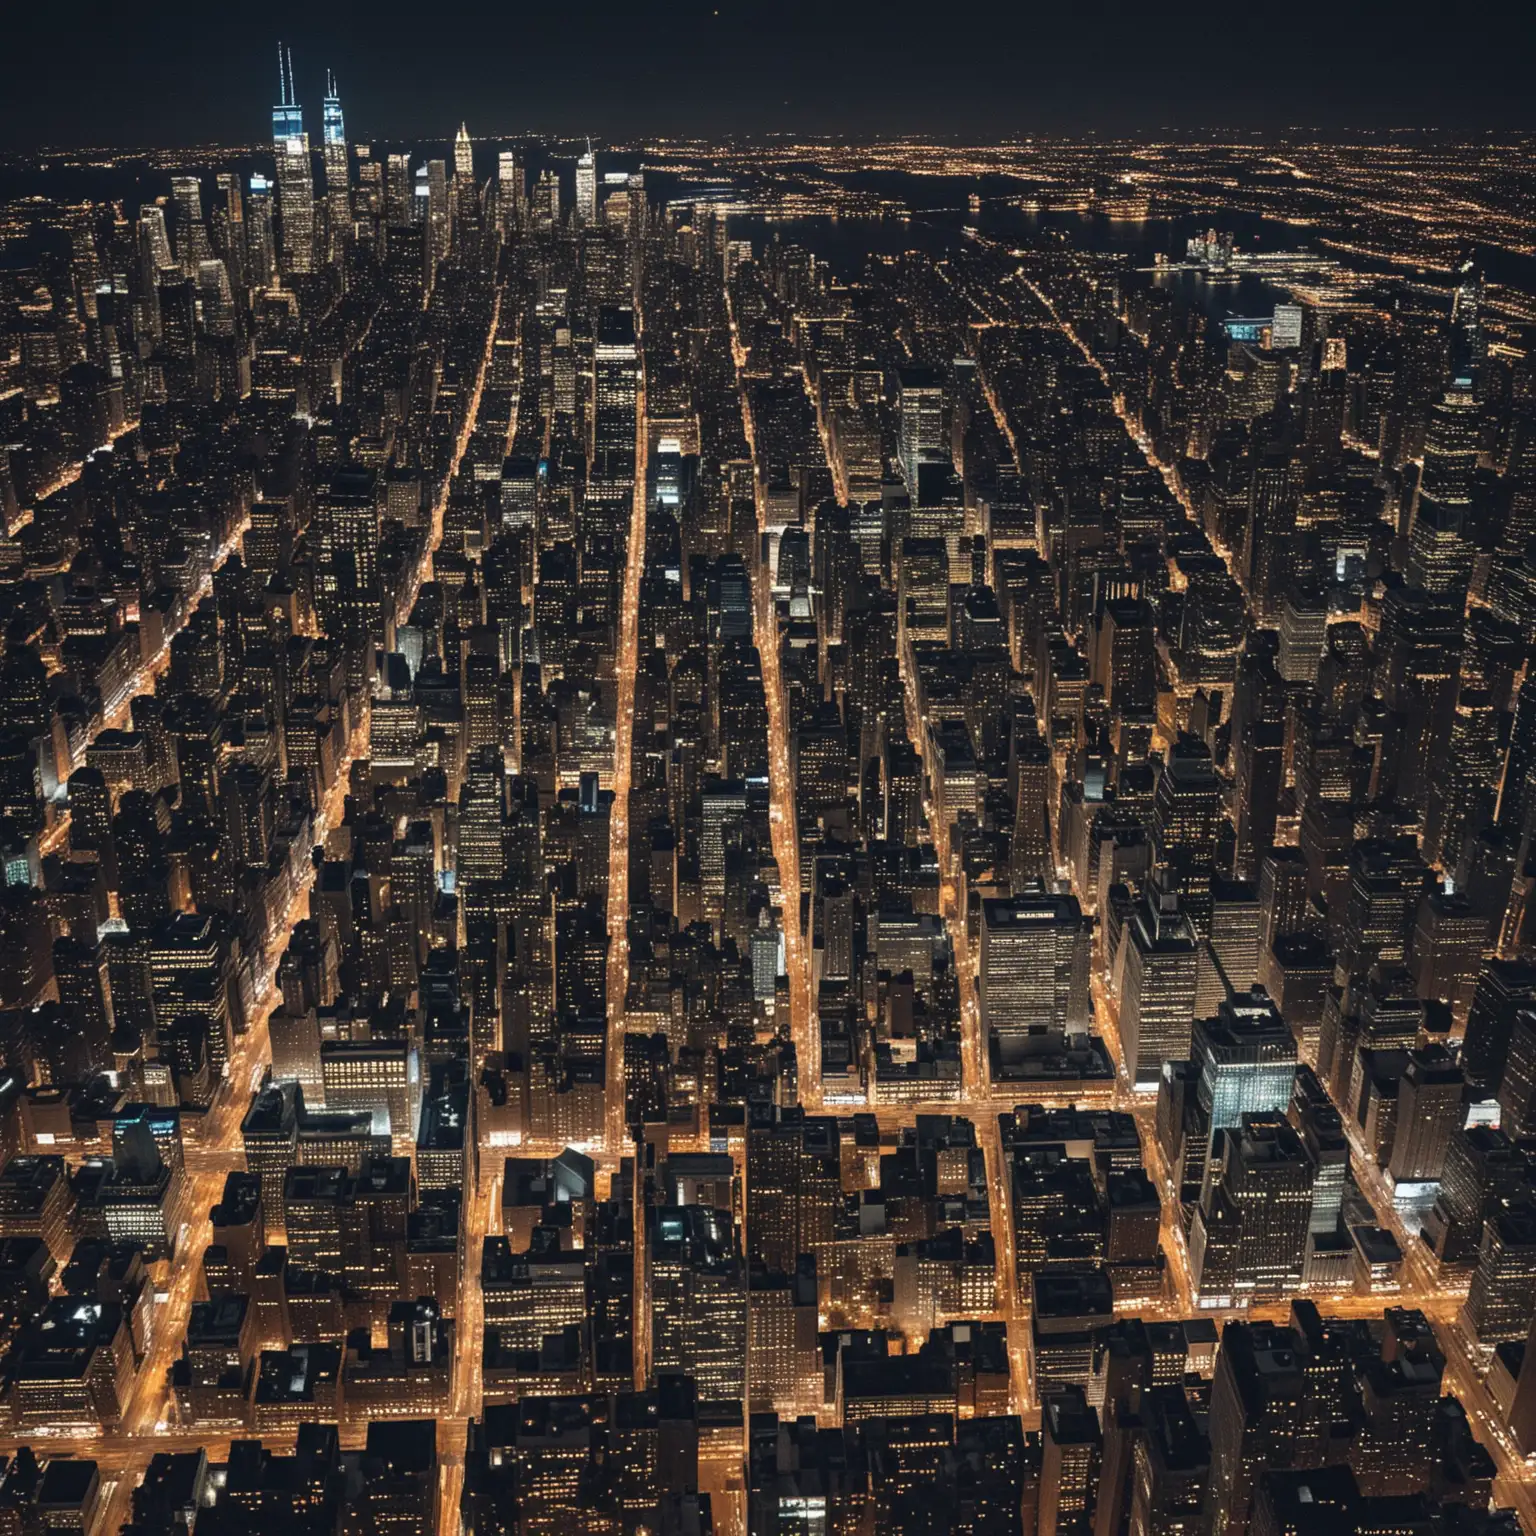 Nighttime-Cityscape-of-New-York-A-Mesmerizing-Aerial-View